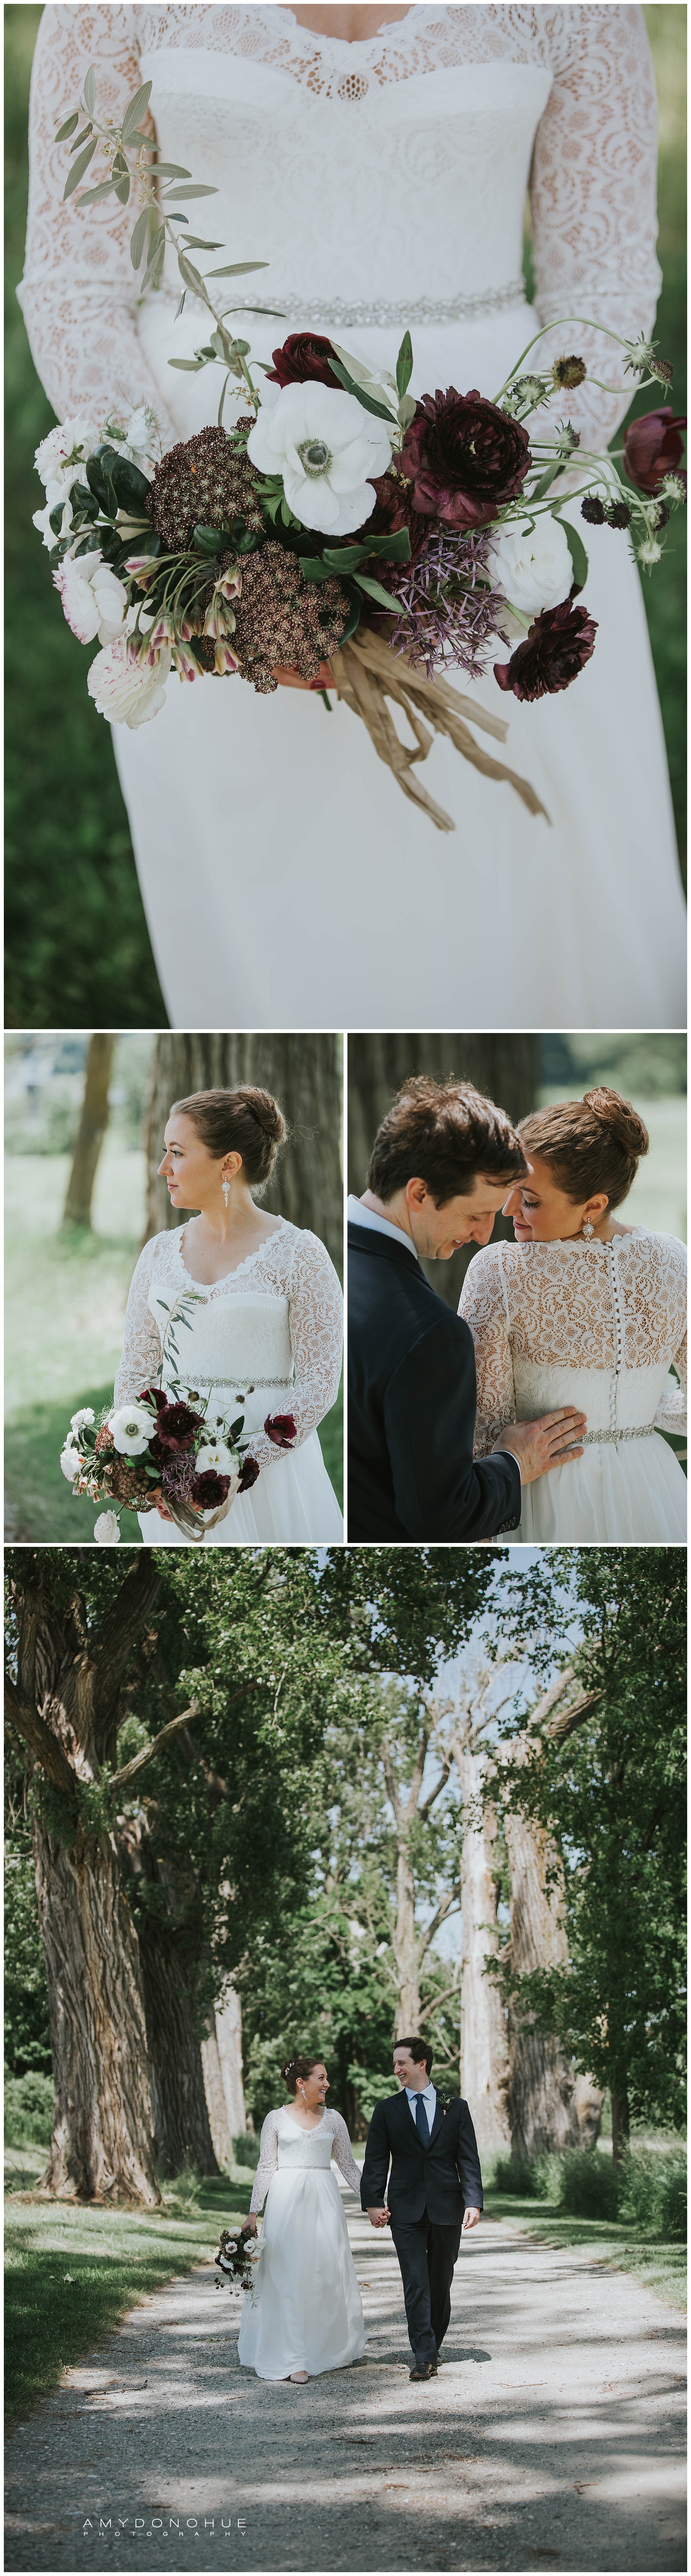 Bride and groom first look at Shelburne Farms | Photography by Amy Donohue Photography